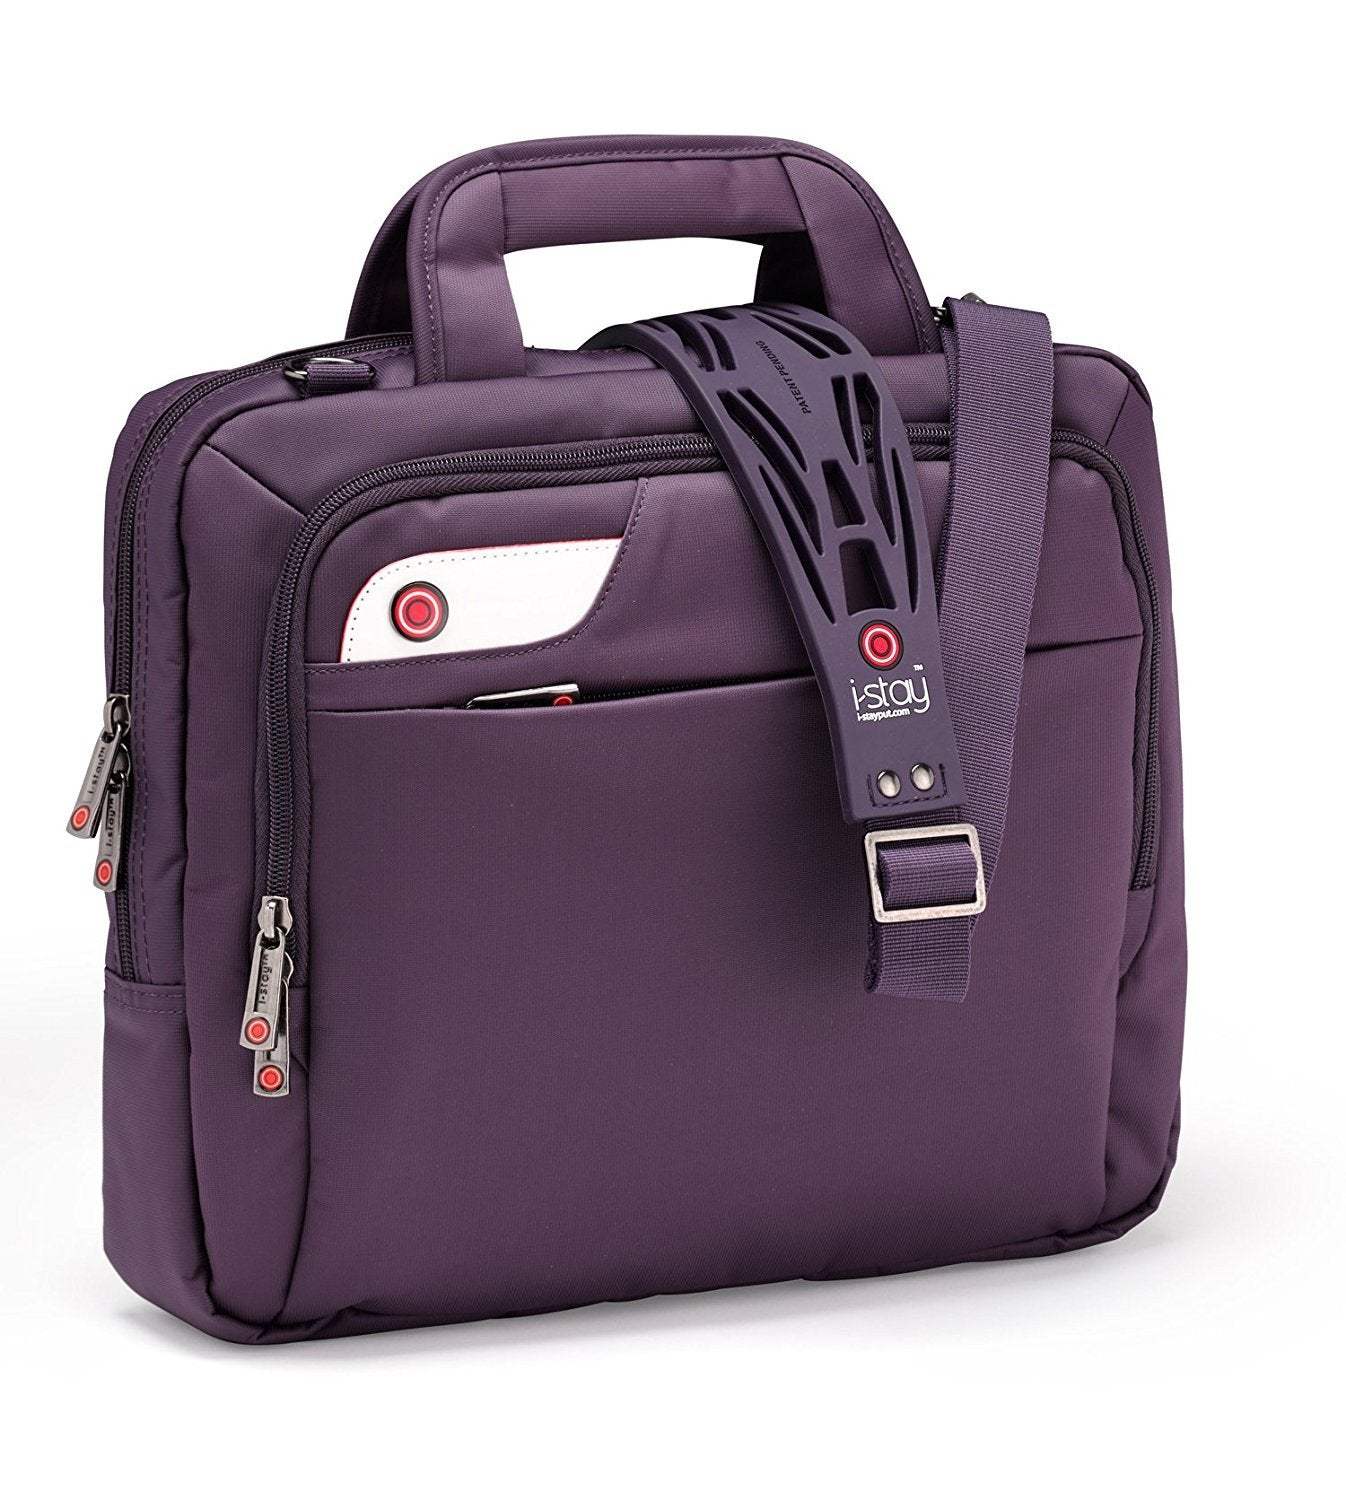 i-stay 13.3 inch Laptop Bag - The Luxury Promotional Gifts Company Limited